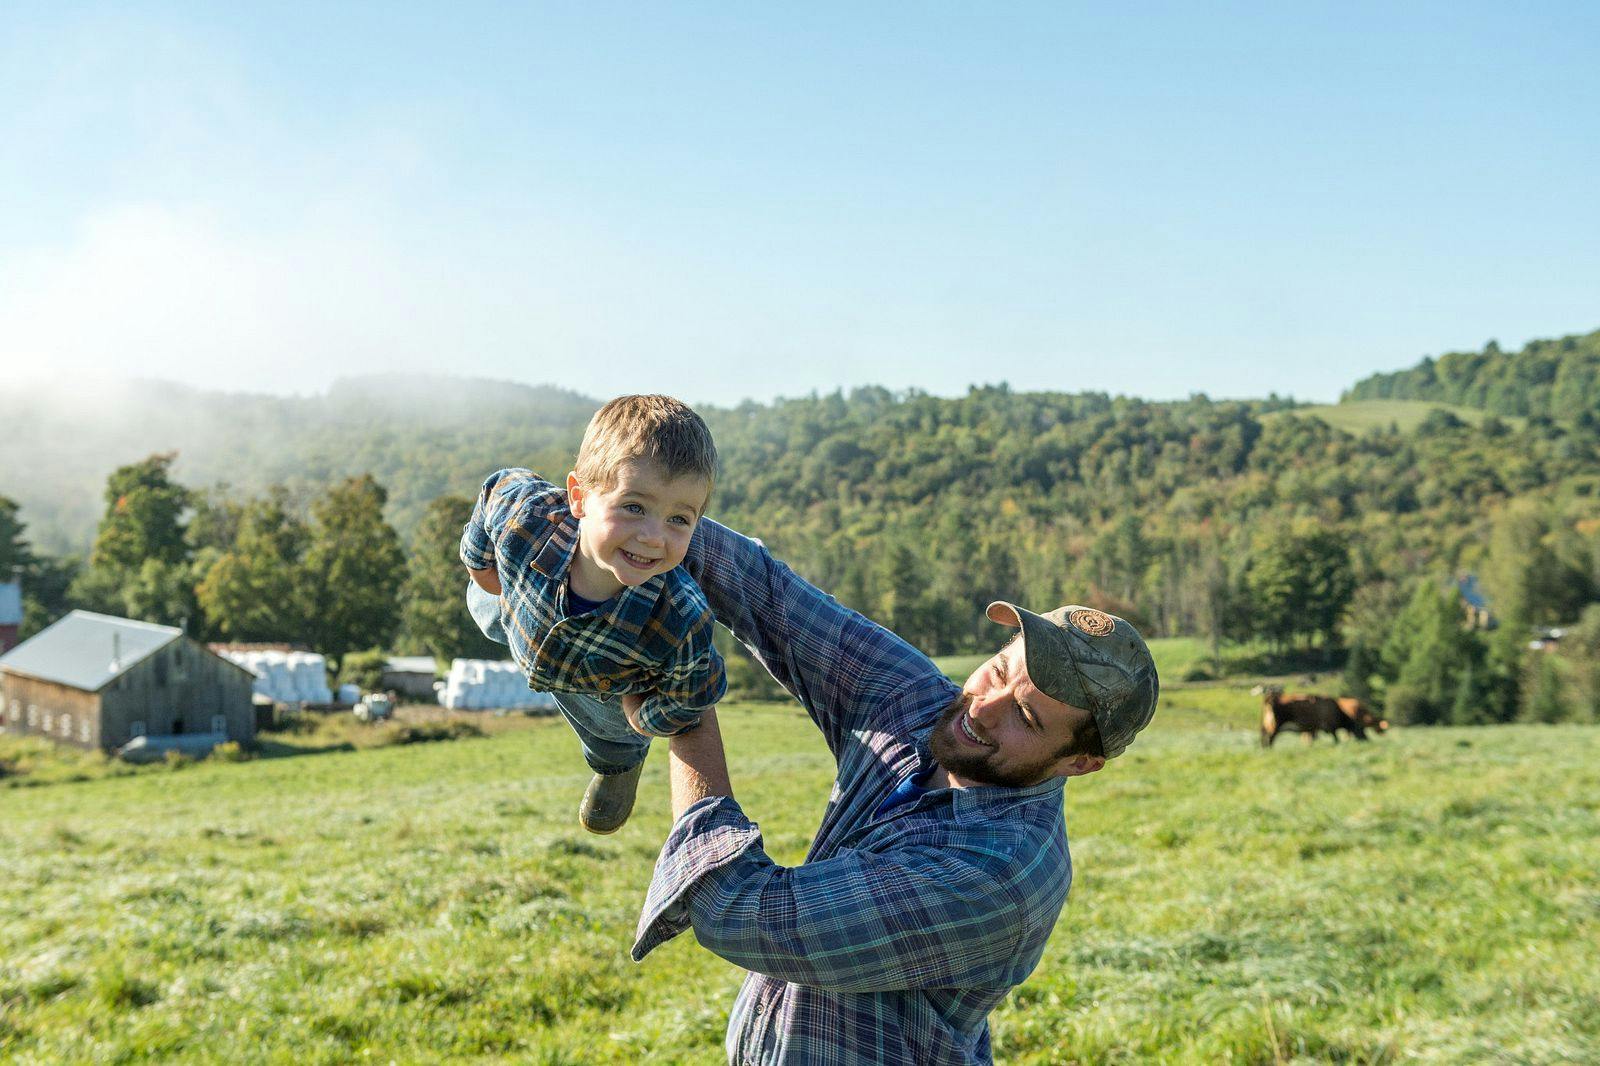 Organic Valley farmer, Henry Pearl, and his son take time to play in the pasture at their organic farm in Vermont.